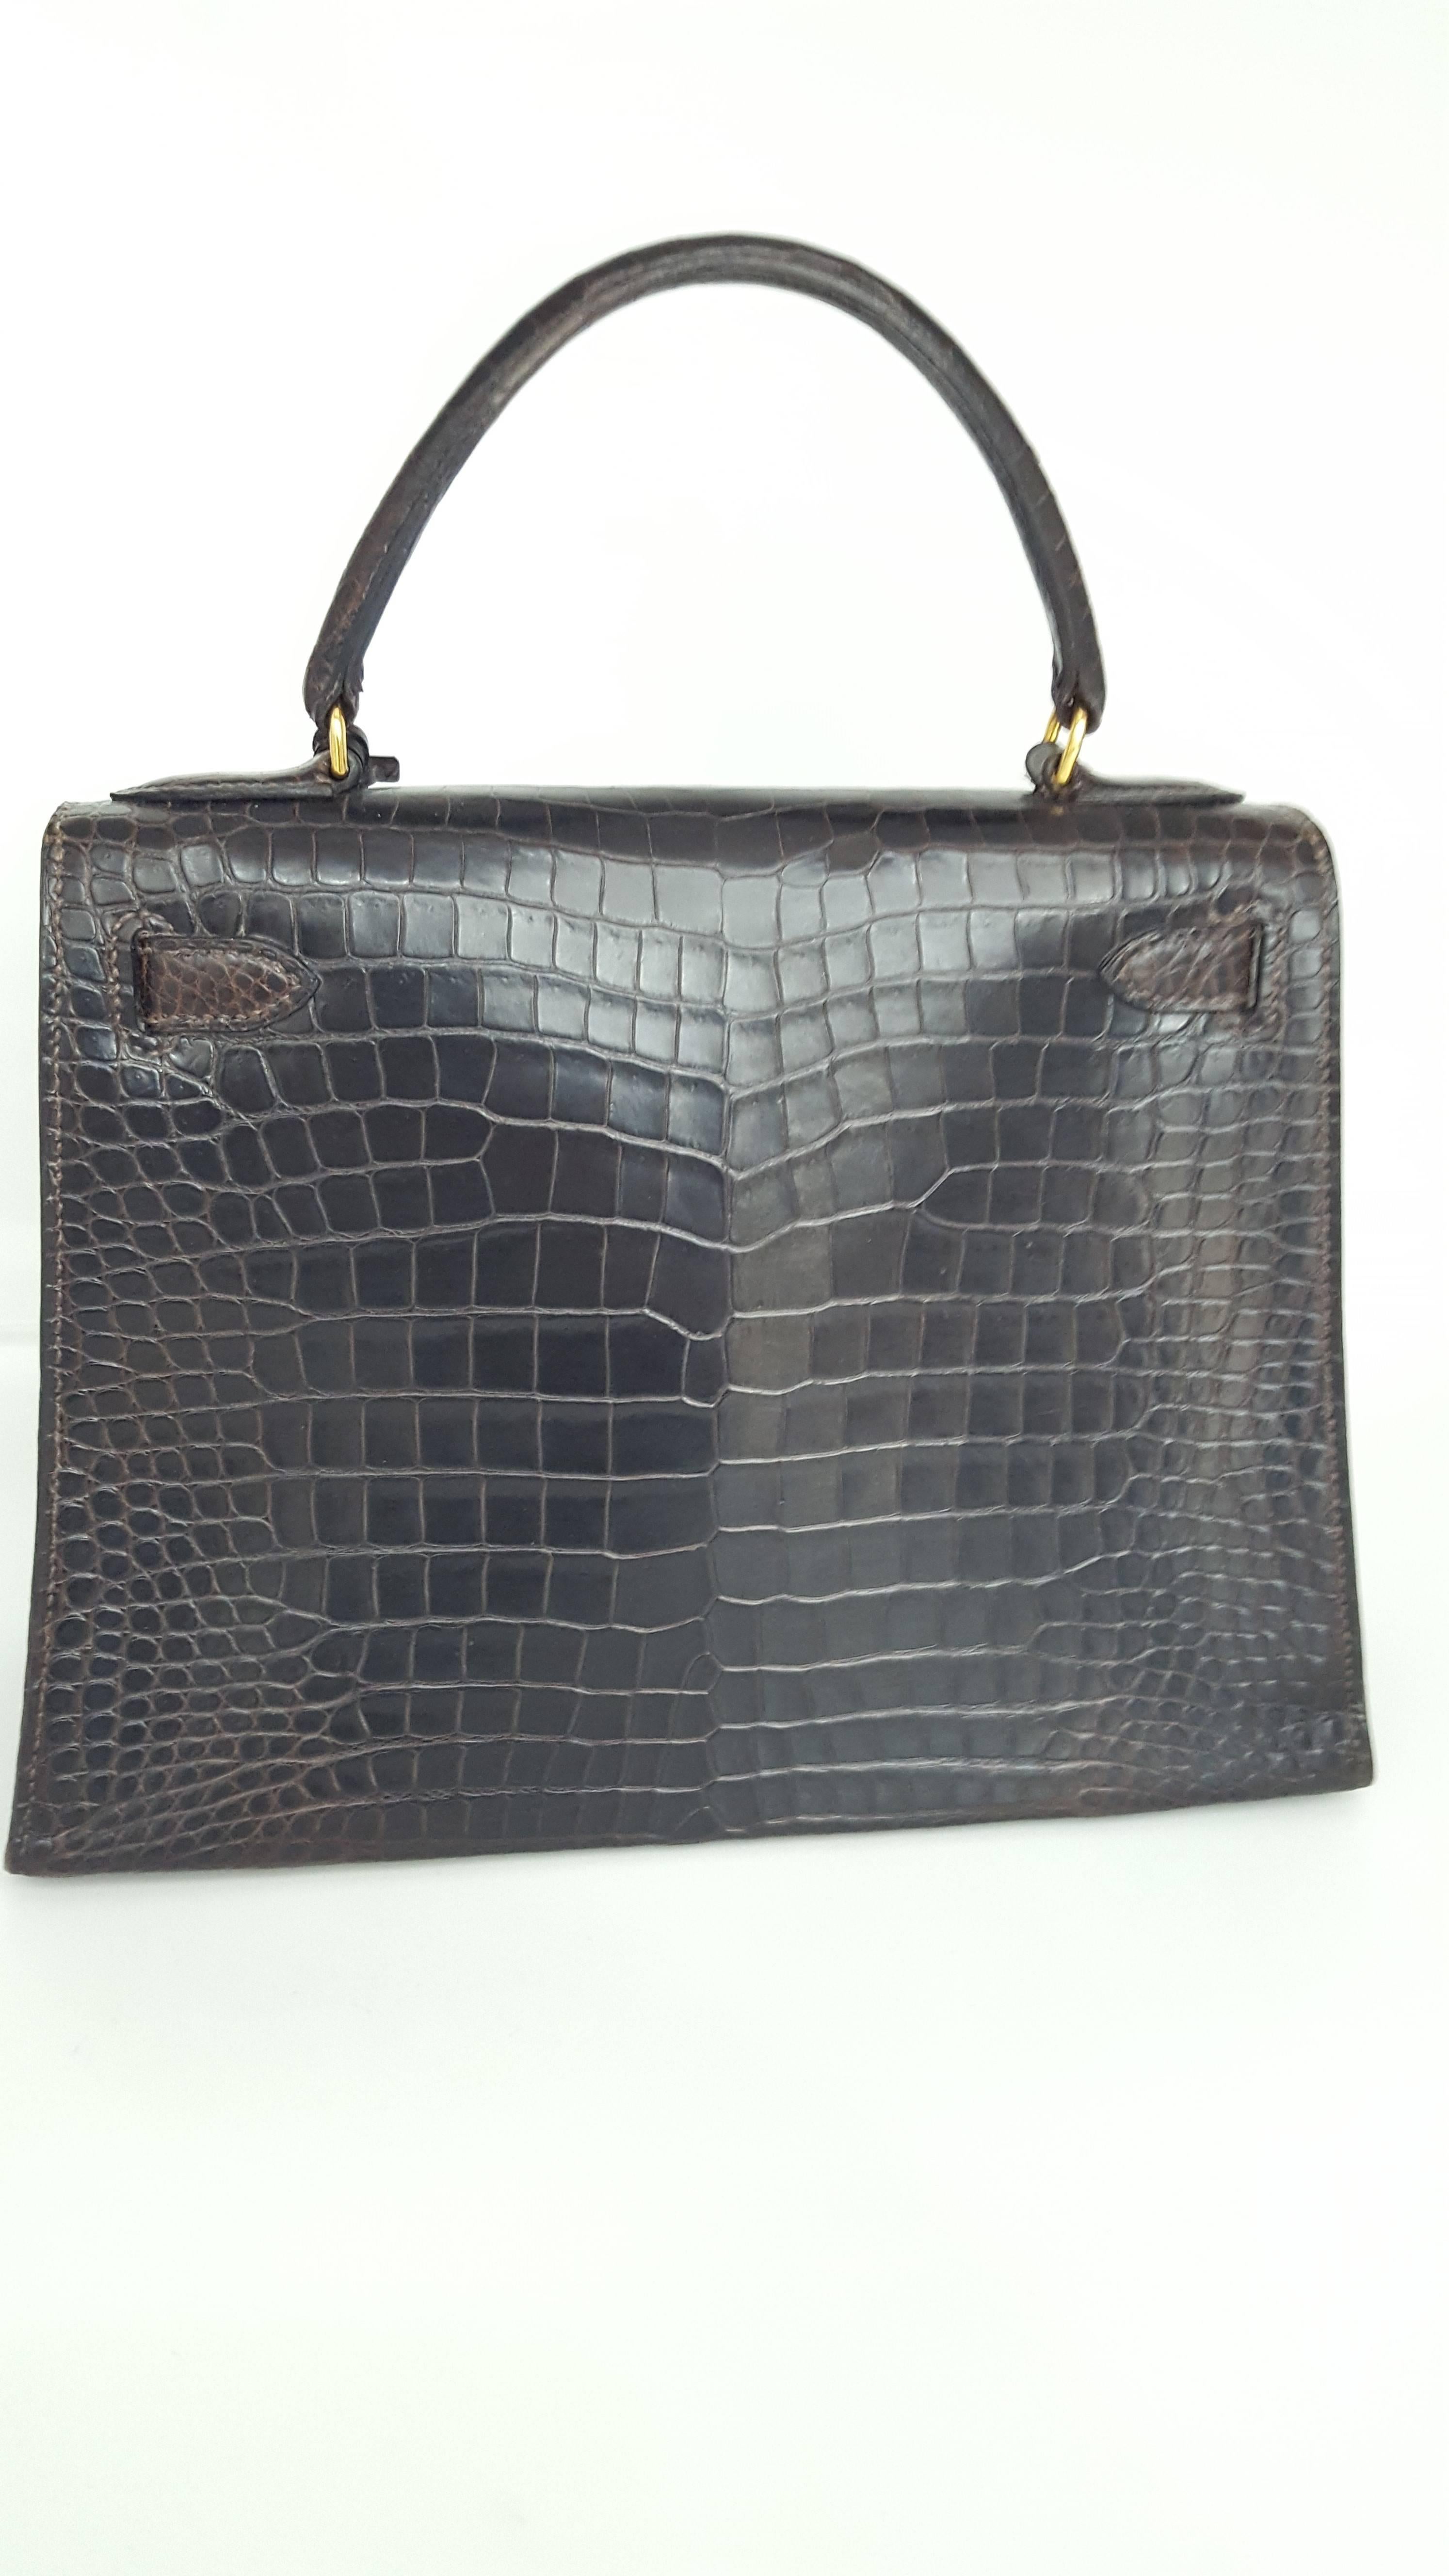 Offered here is a vintage Hermes Kelly 28 cm in a rich dark brown shiny crocodile from 1985.  This bag is in mint condition. The color is so dark it appears black.  All hardware in excellent condition. 
will ship with original lock, keys, and dust